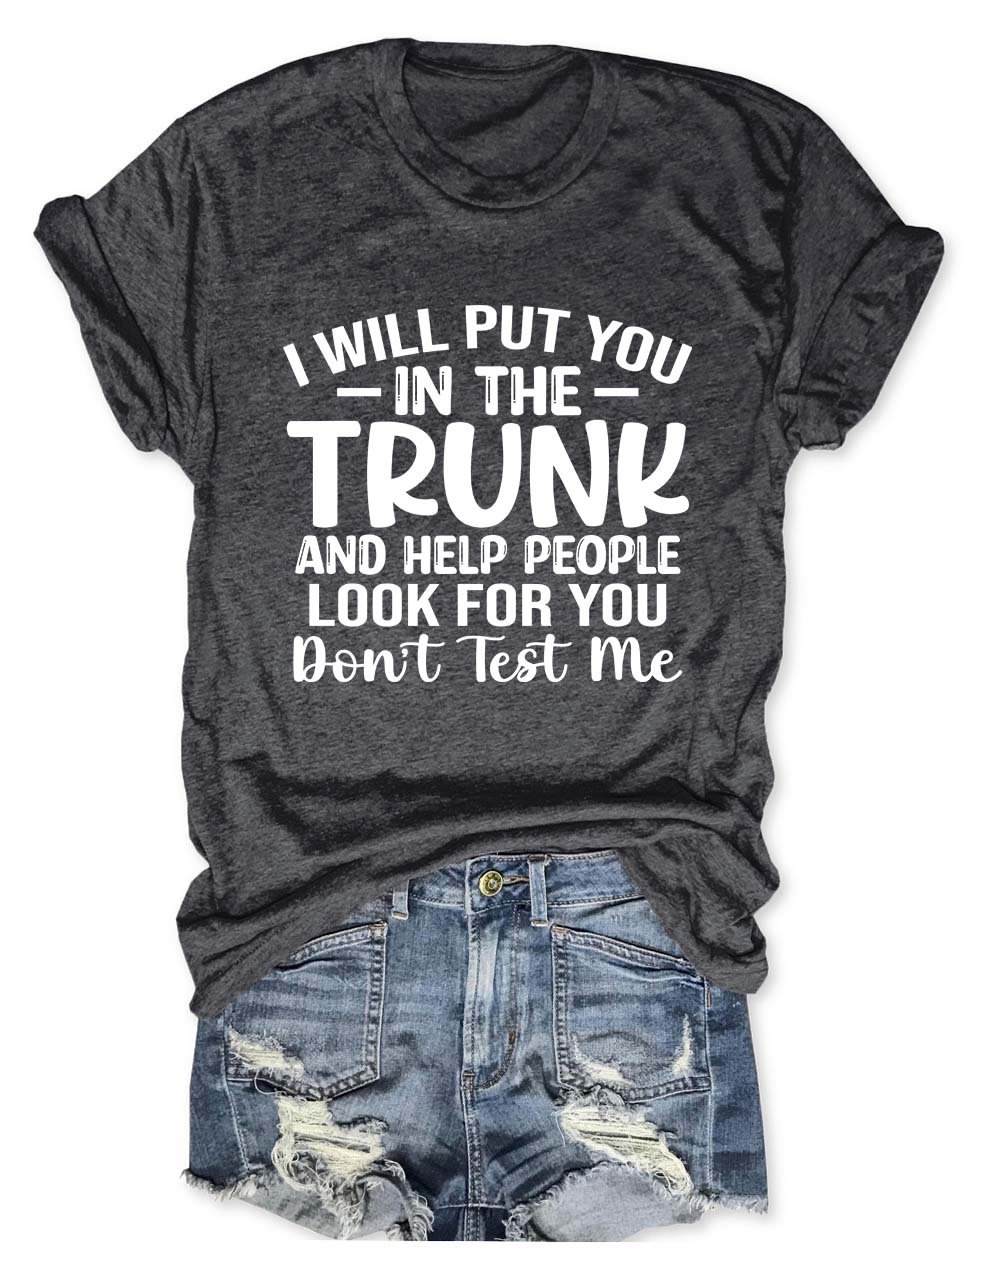 I Will Put You In A Trunk T-Shirt